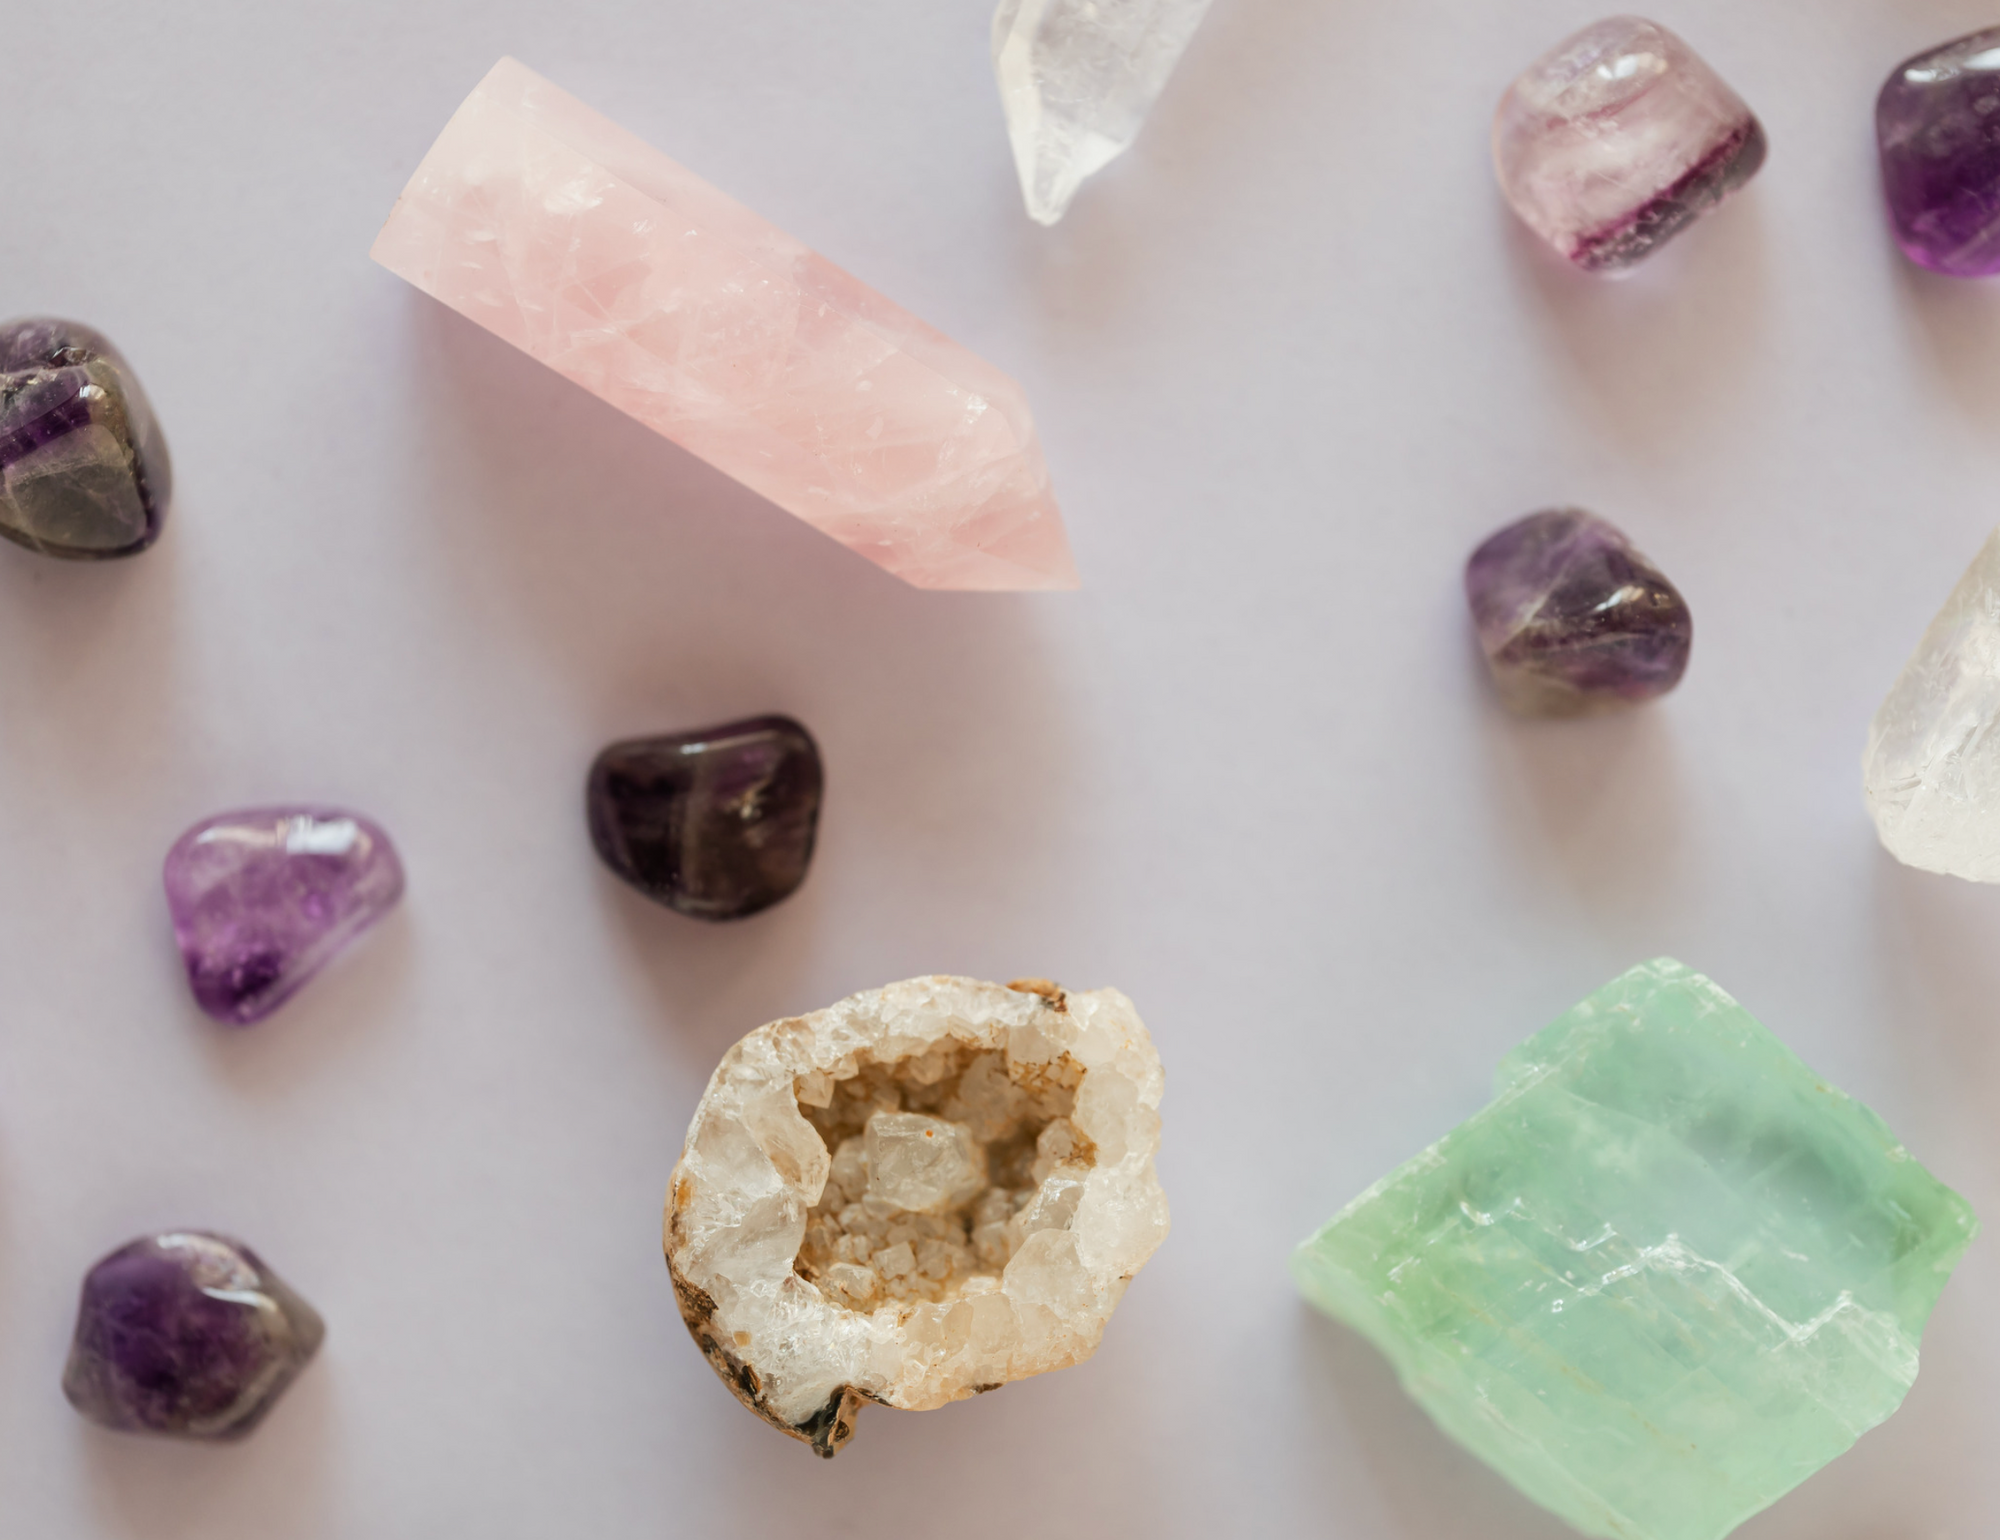 Top 10 Crystals For Good Energy